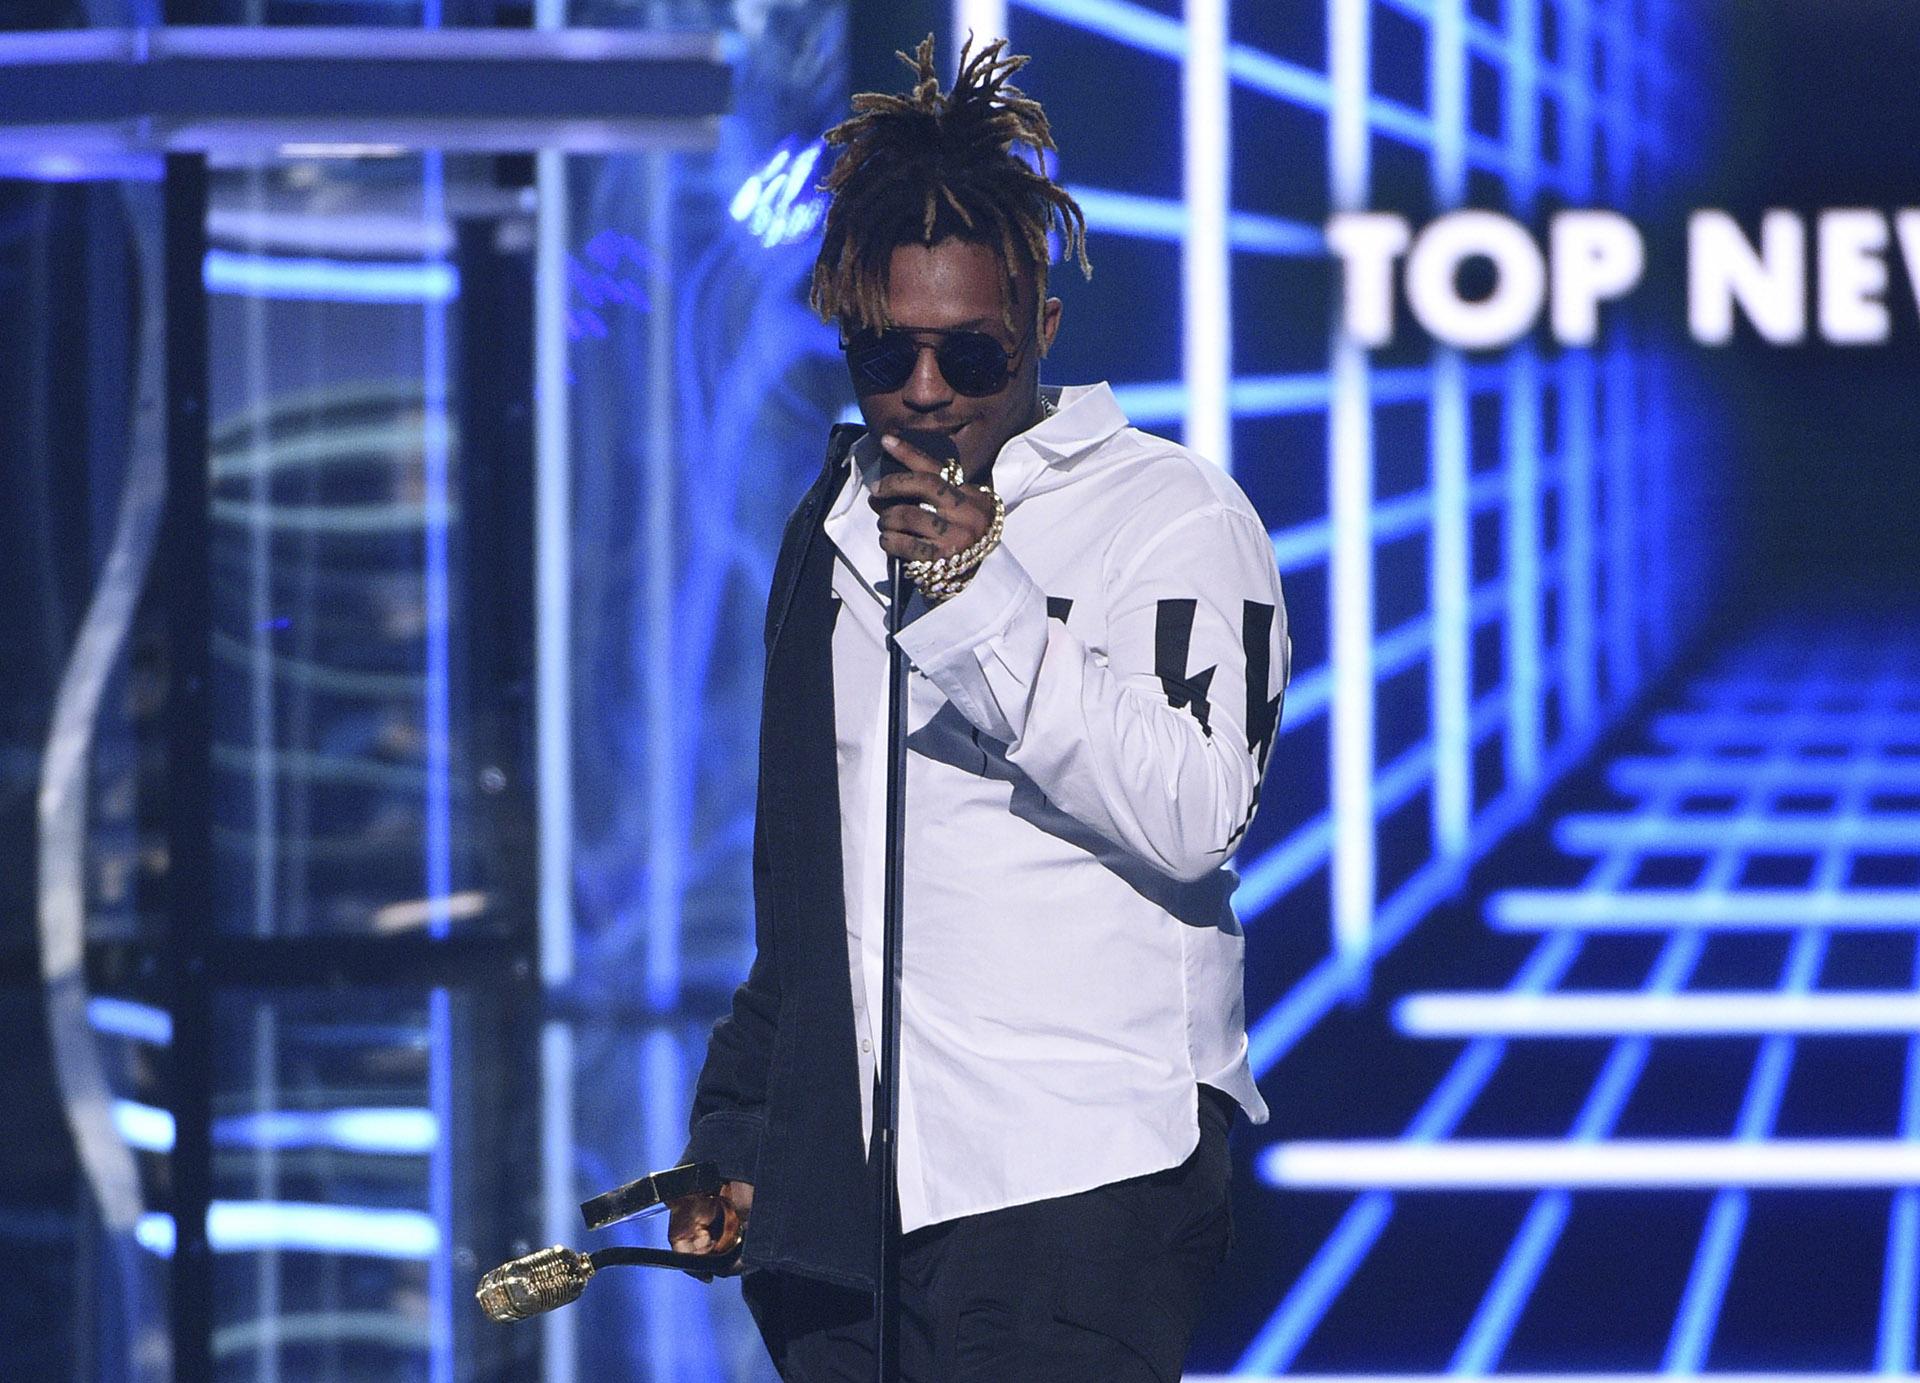 In this May 1, 2019 file photo, Juice WRLD accepts the award for top new artist at the Billboard Music Awards at the MGM Grand Garden Arena in Las Vegas. (Photo by Chris Pizzello / Invision/AP, File)